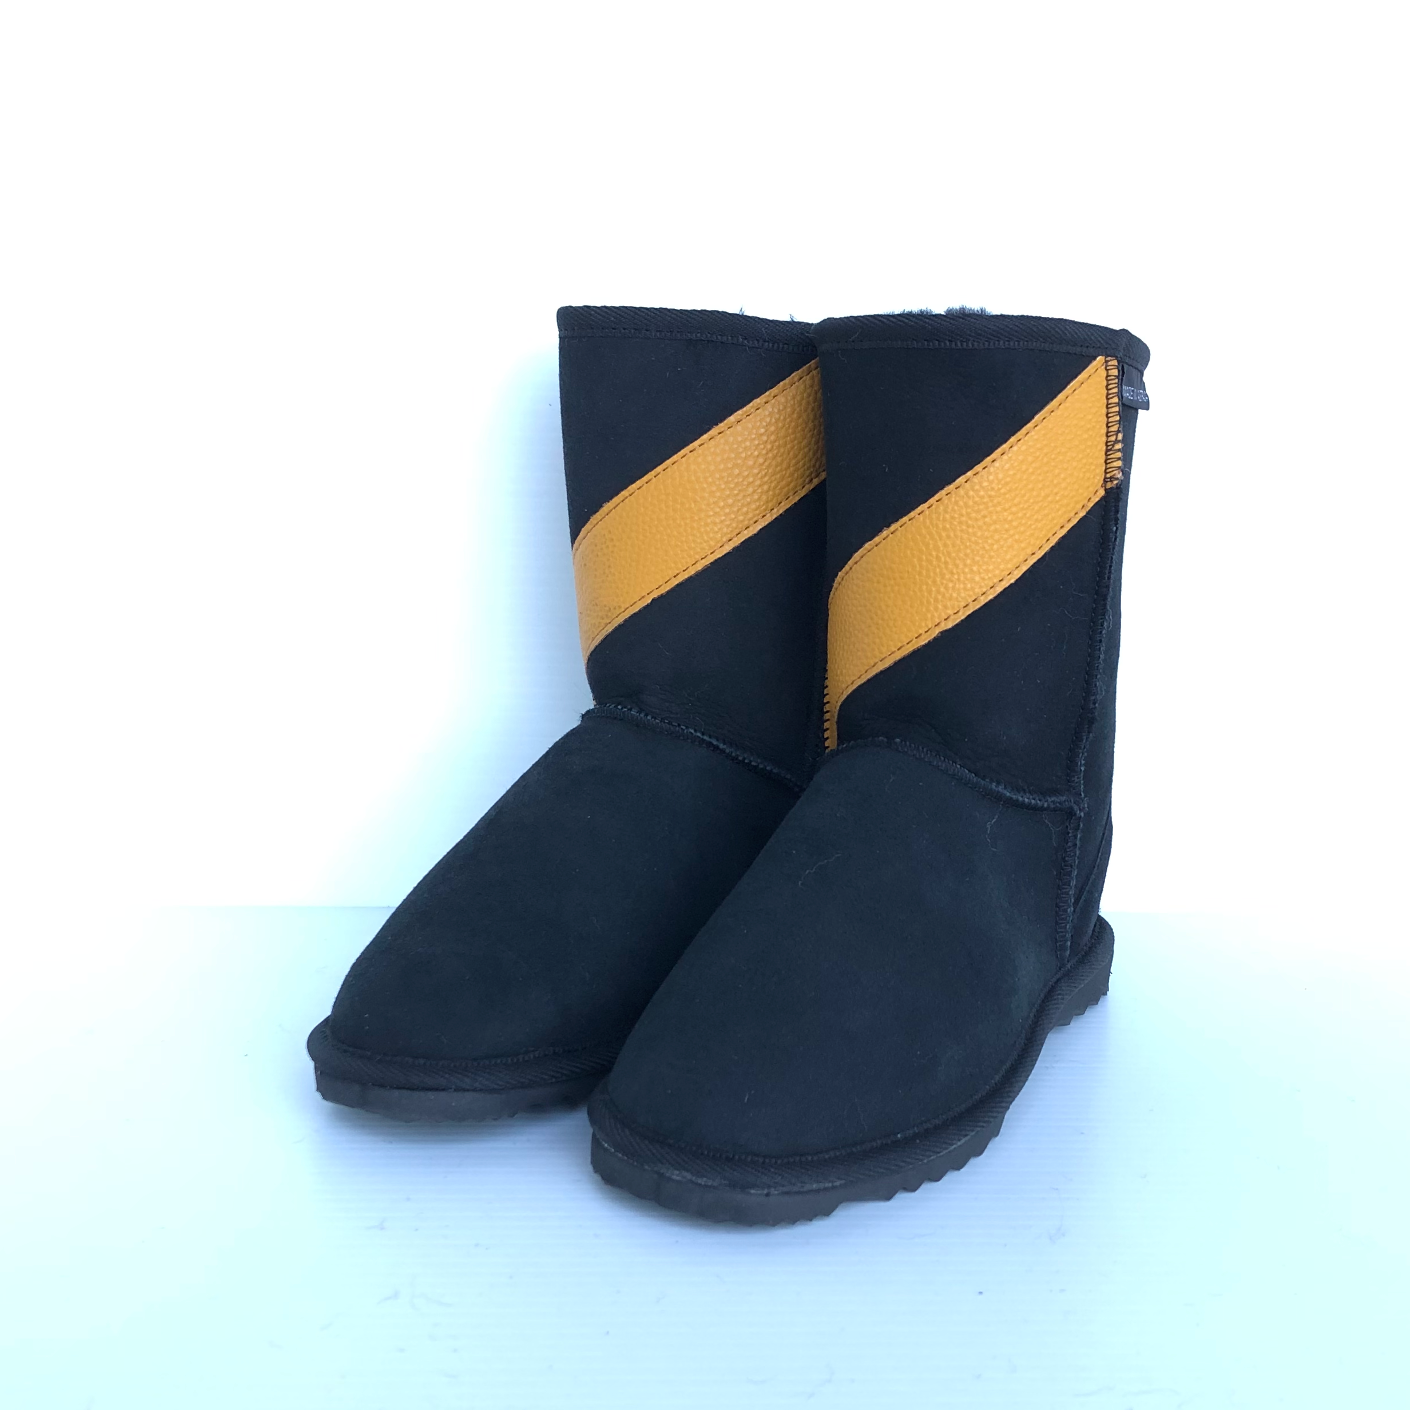 Pair of black Ugg Boots, team coloured with yellow leather style stripe diagonally across front